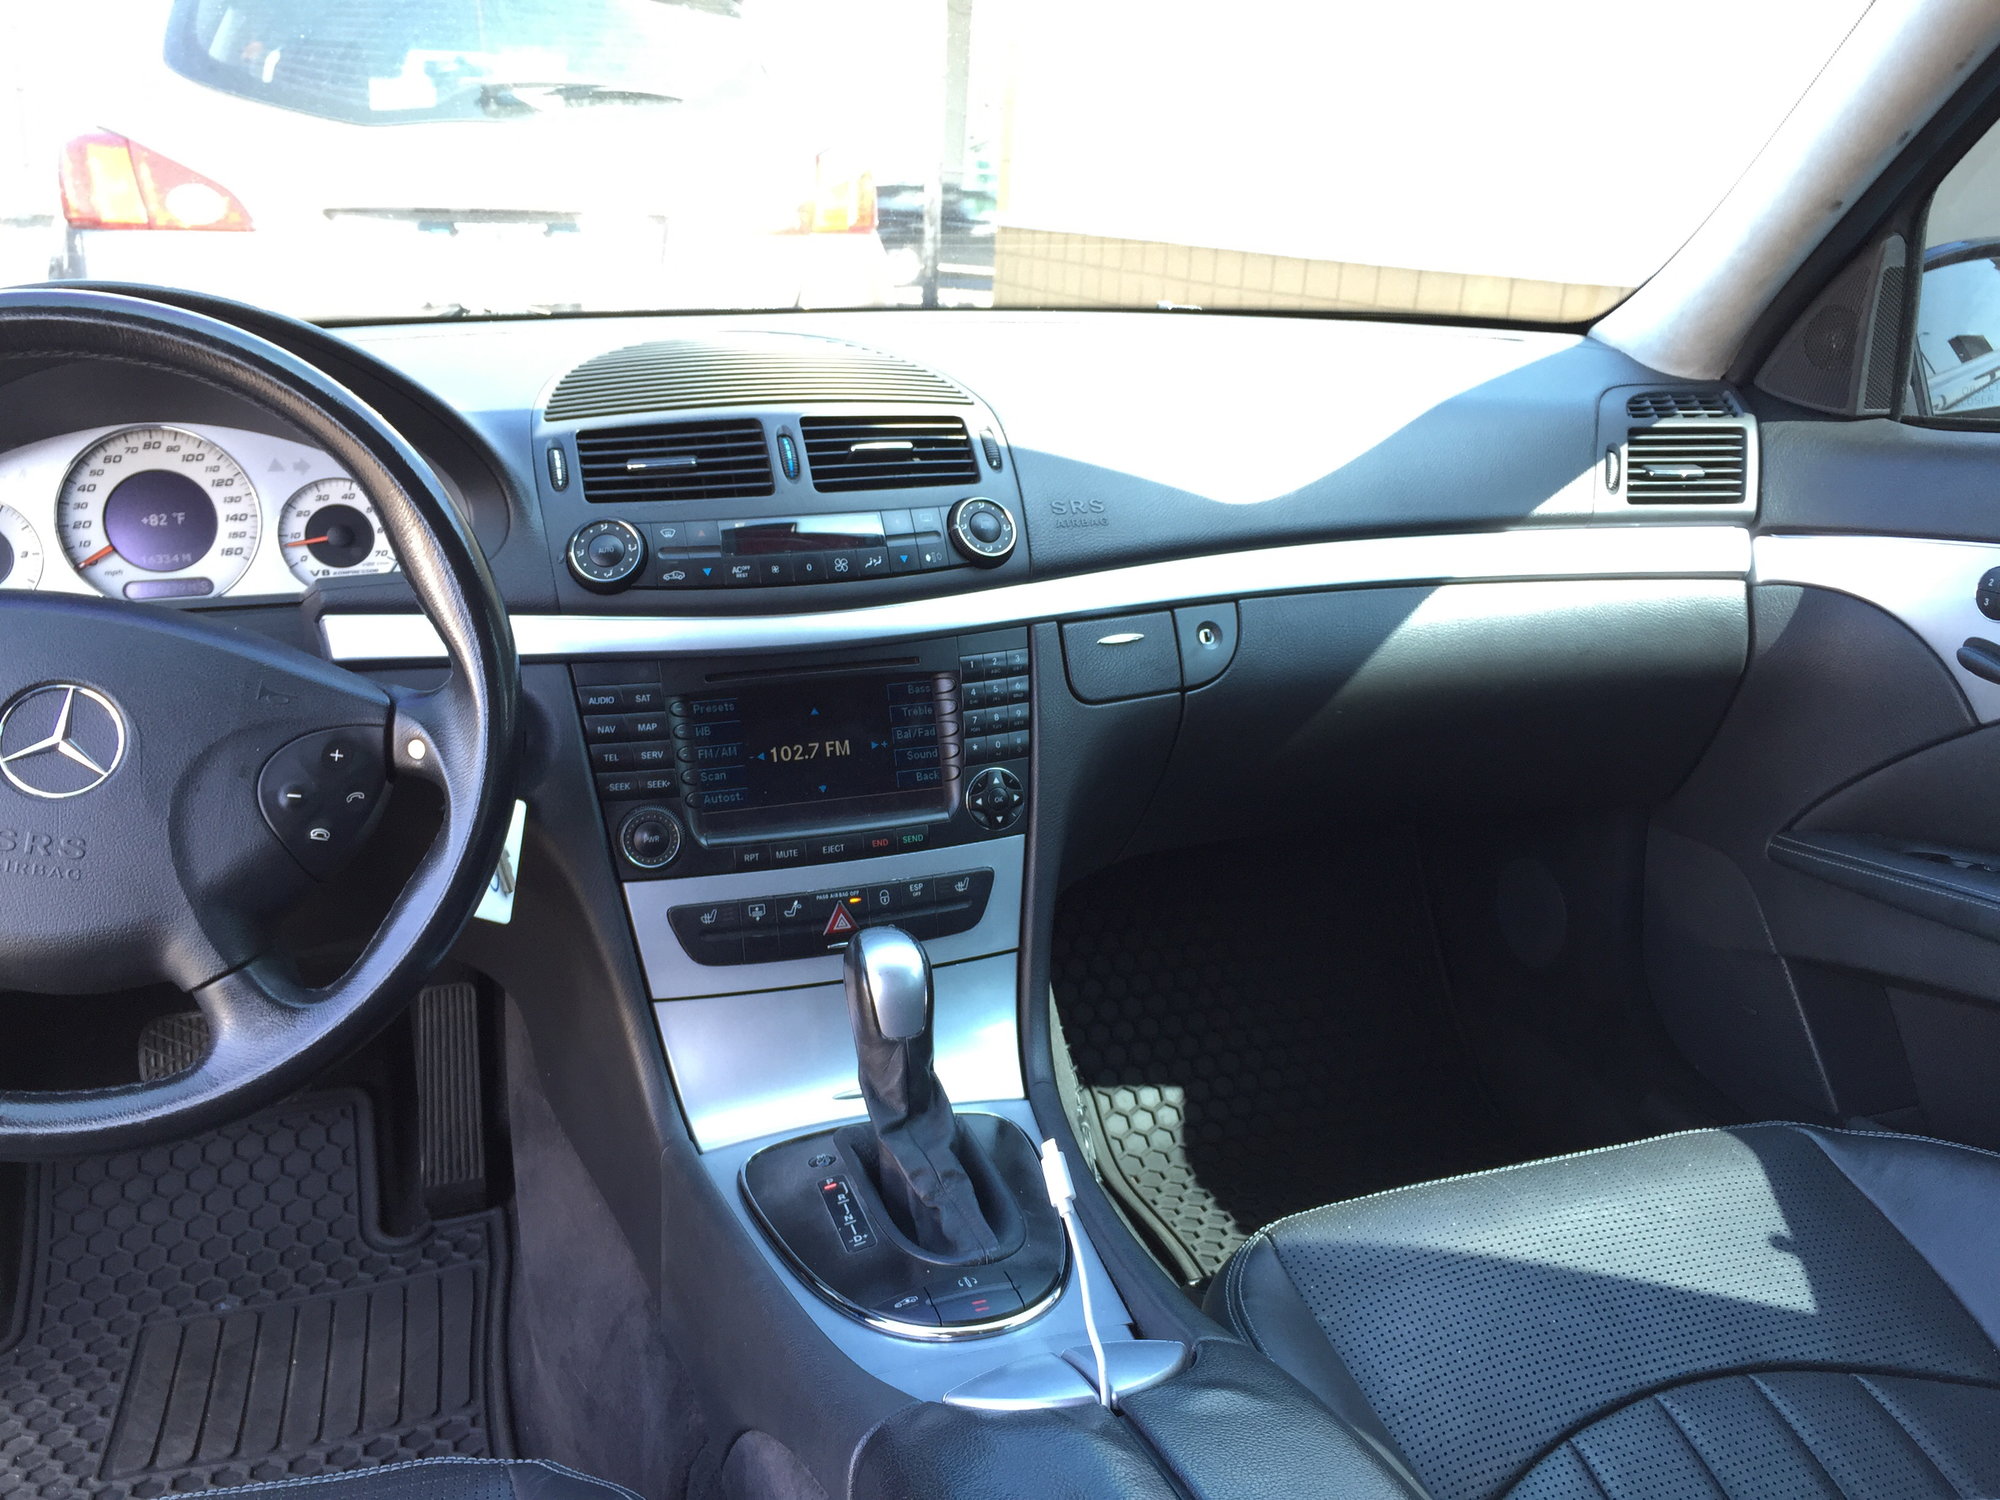 Painted My Interior Wood Trim Hyper Silver Mbworld Org Forums